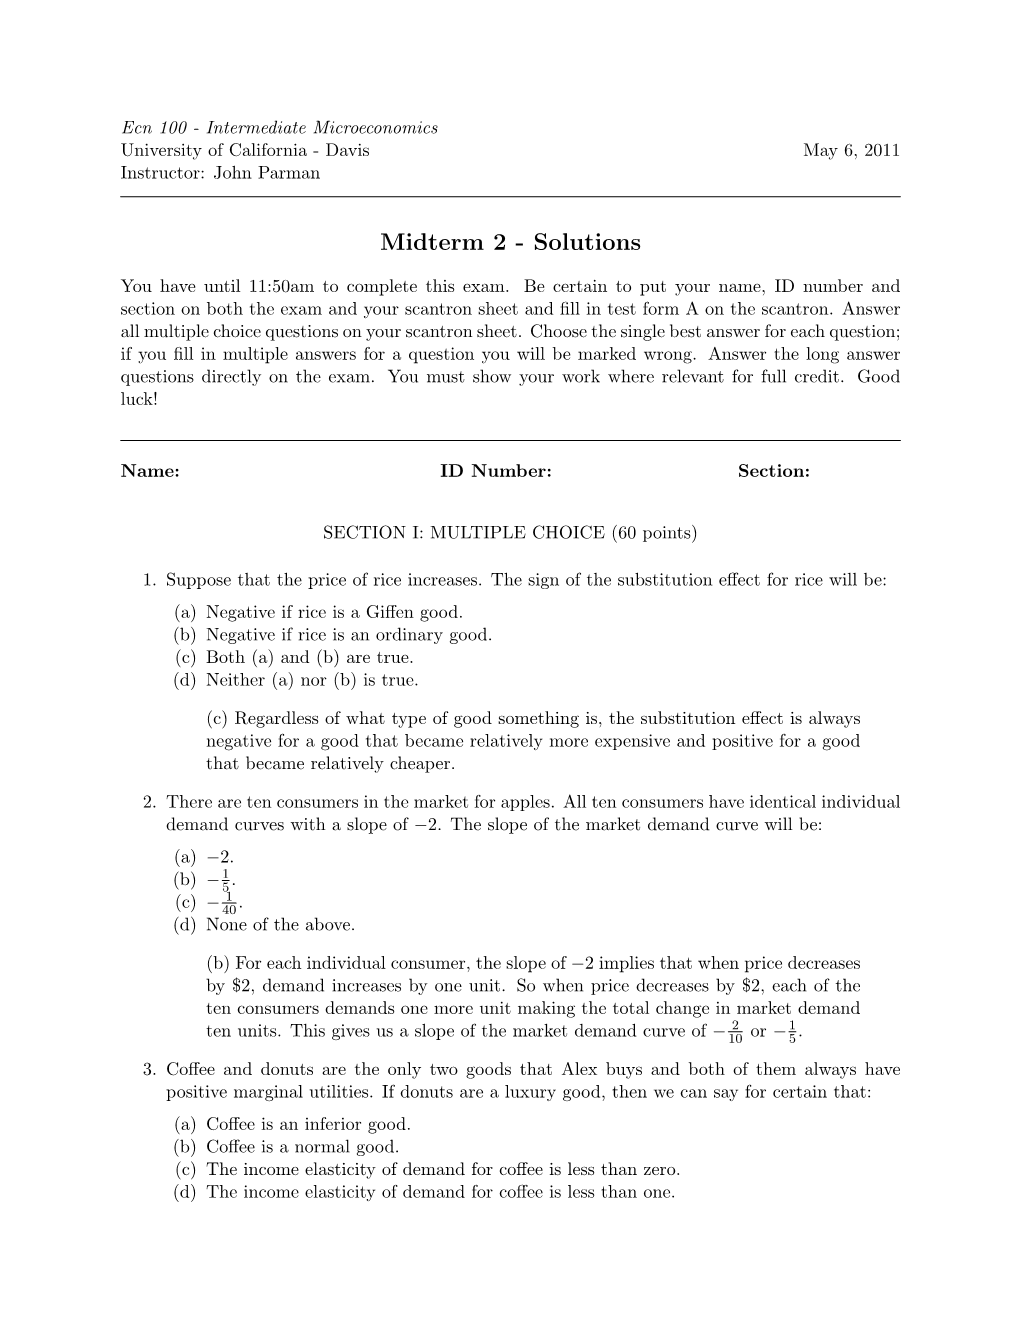 Midterm 2 - Solutions